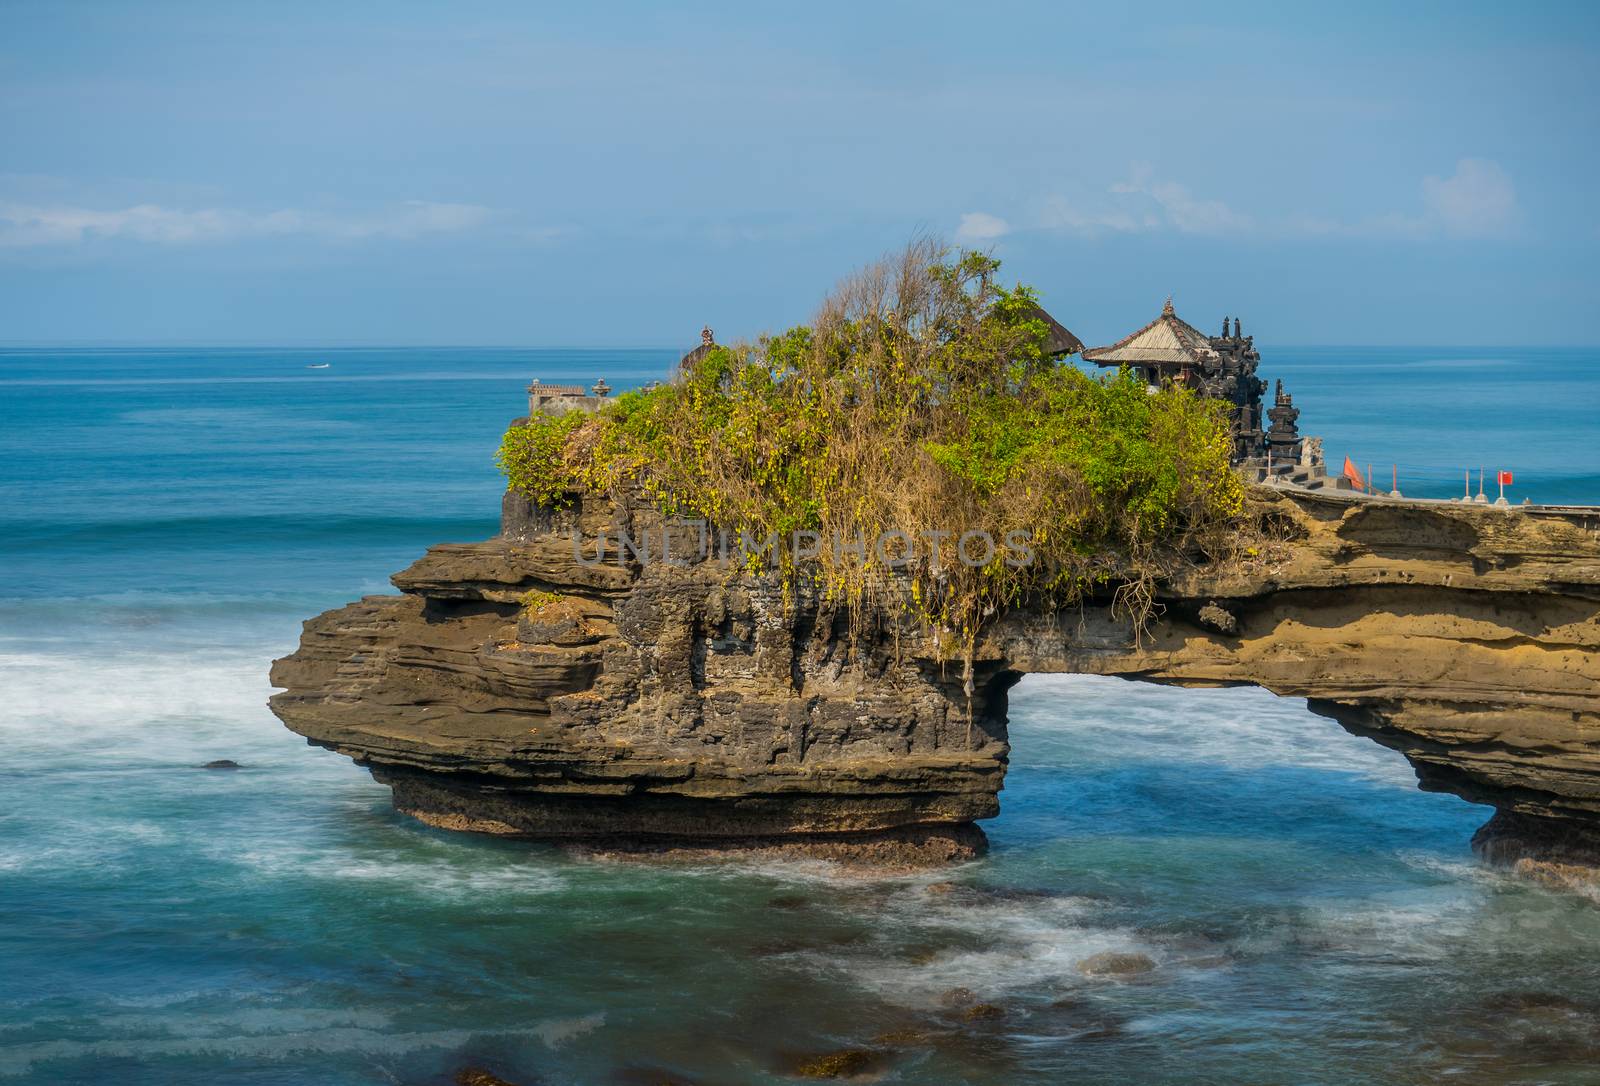 The temple "Tanah Lot" on the island of Bali by Netfalls